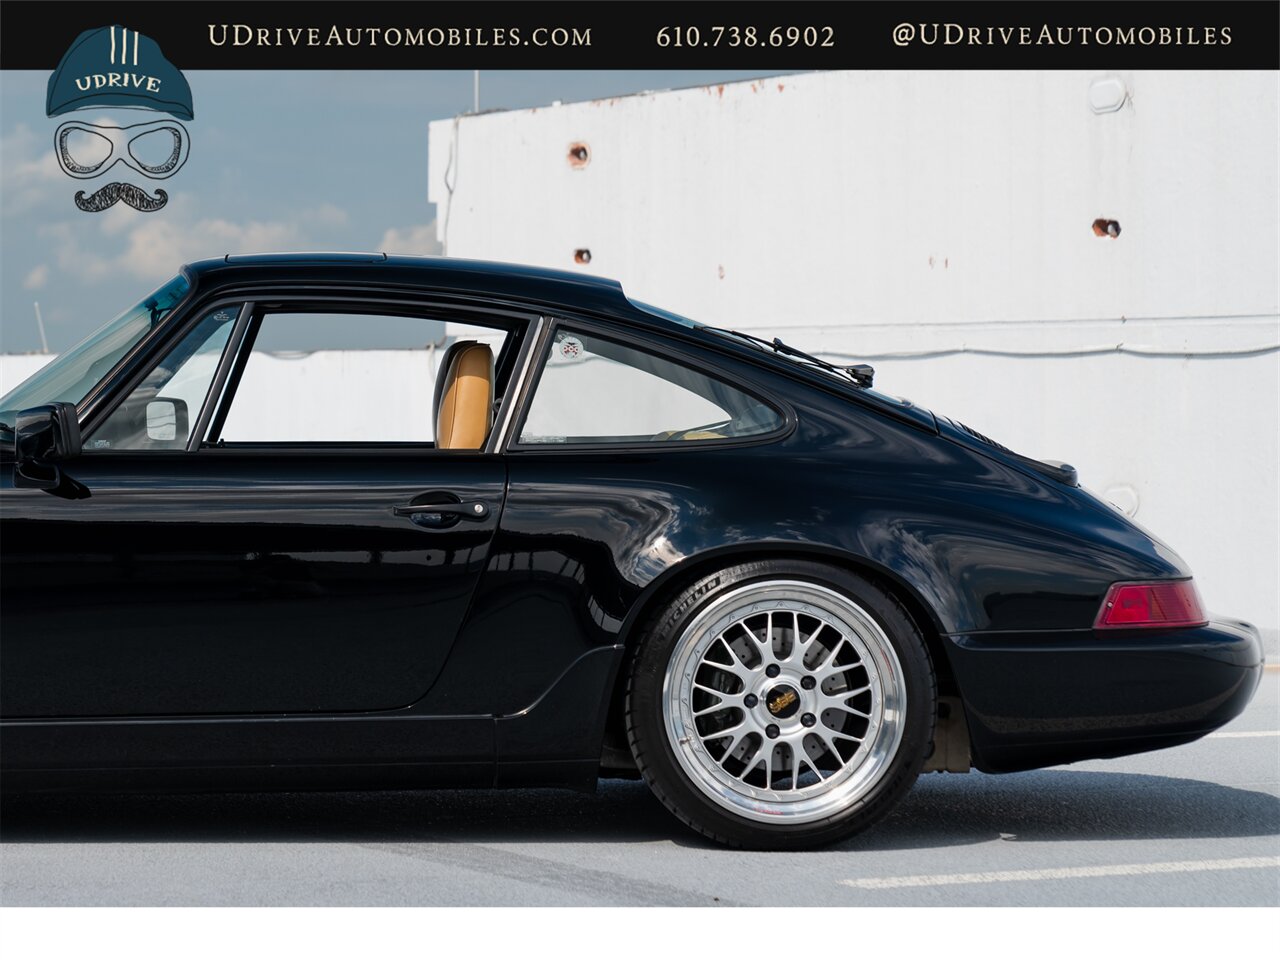 1989 Porsche 911 Carrera 4  964 C4 5 Speed Manual $63k Recent Service and Upgrades - Photo 14 - West Chester, PA 19382